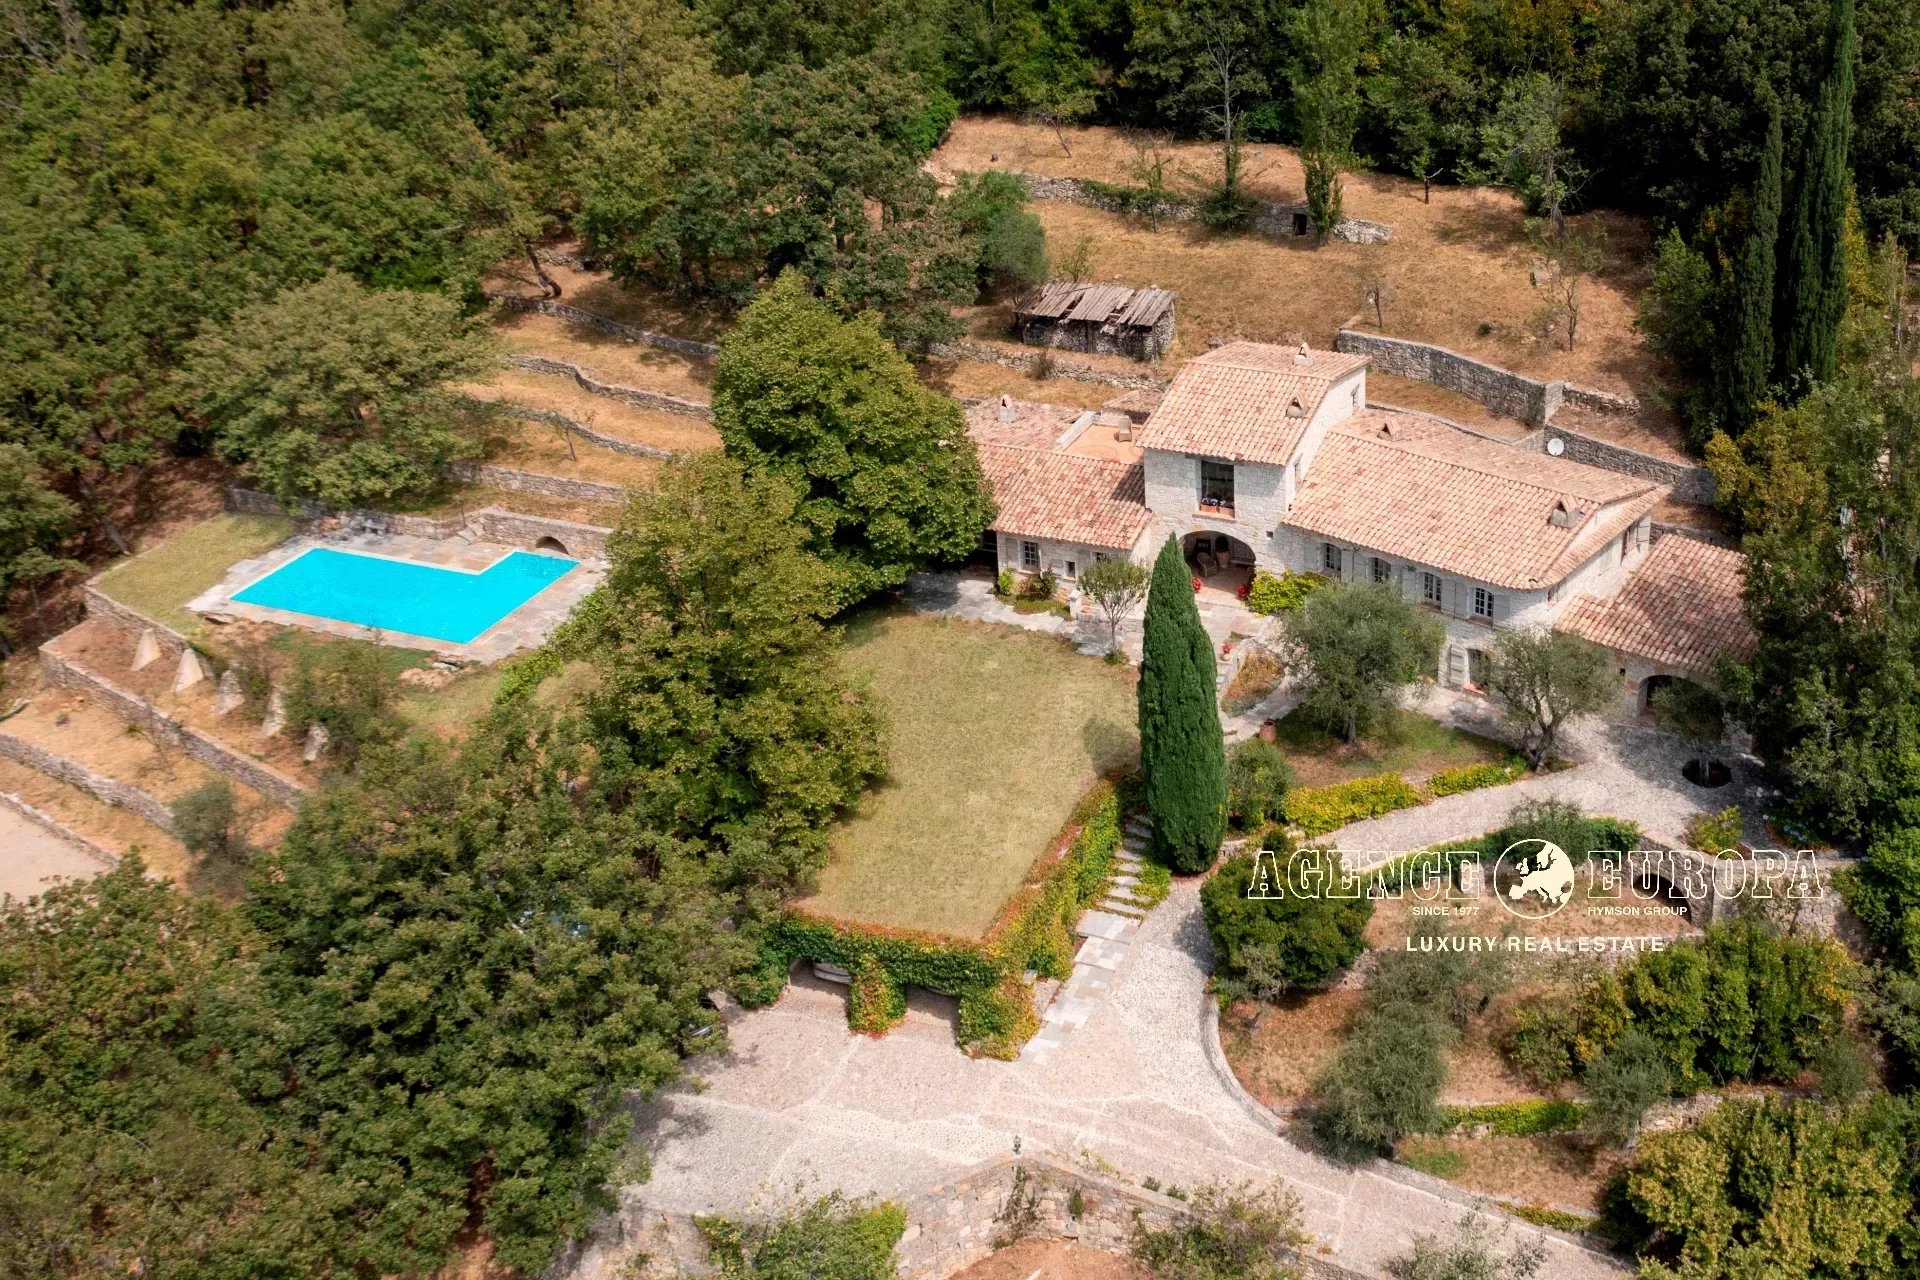 CANNES HINTERLAND - SUPERB "BASTIDE" STYLE STONE HOUSE - PANORAMIC VIEW